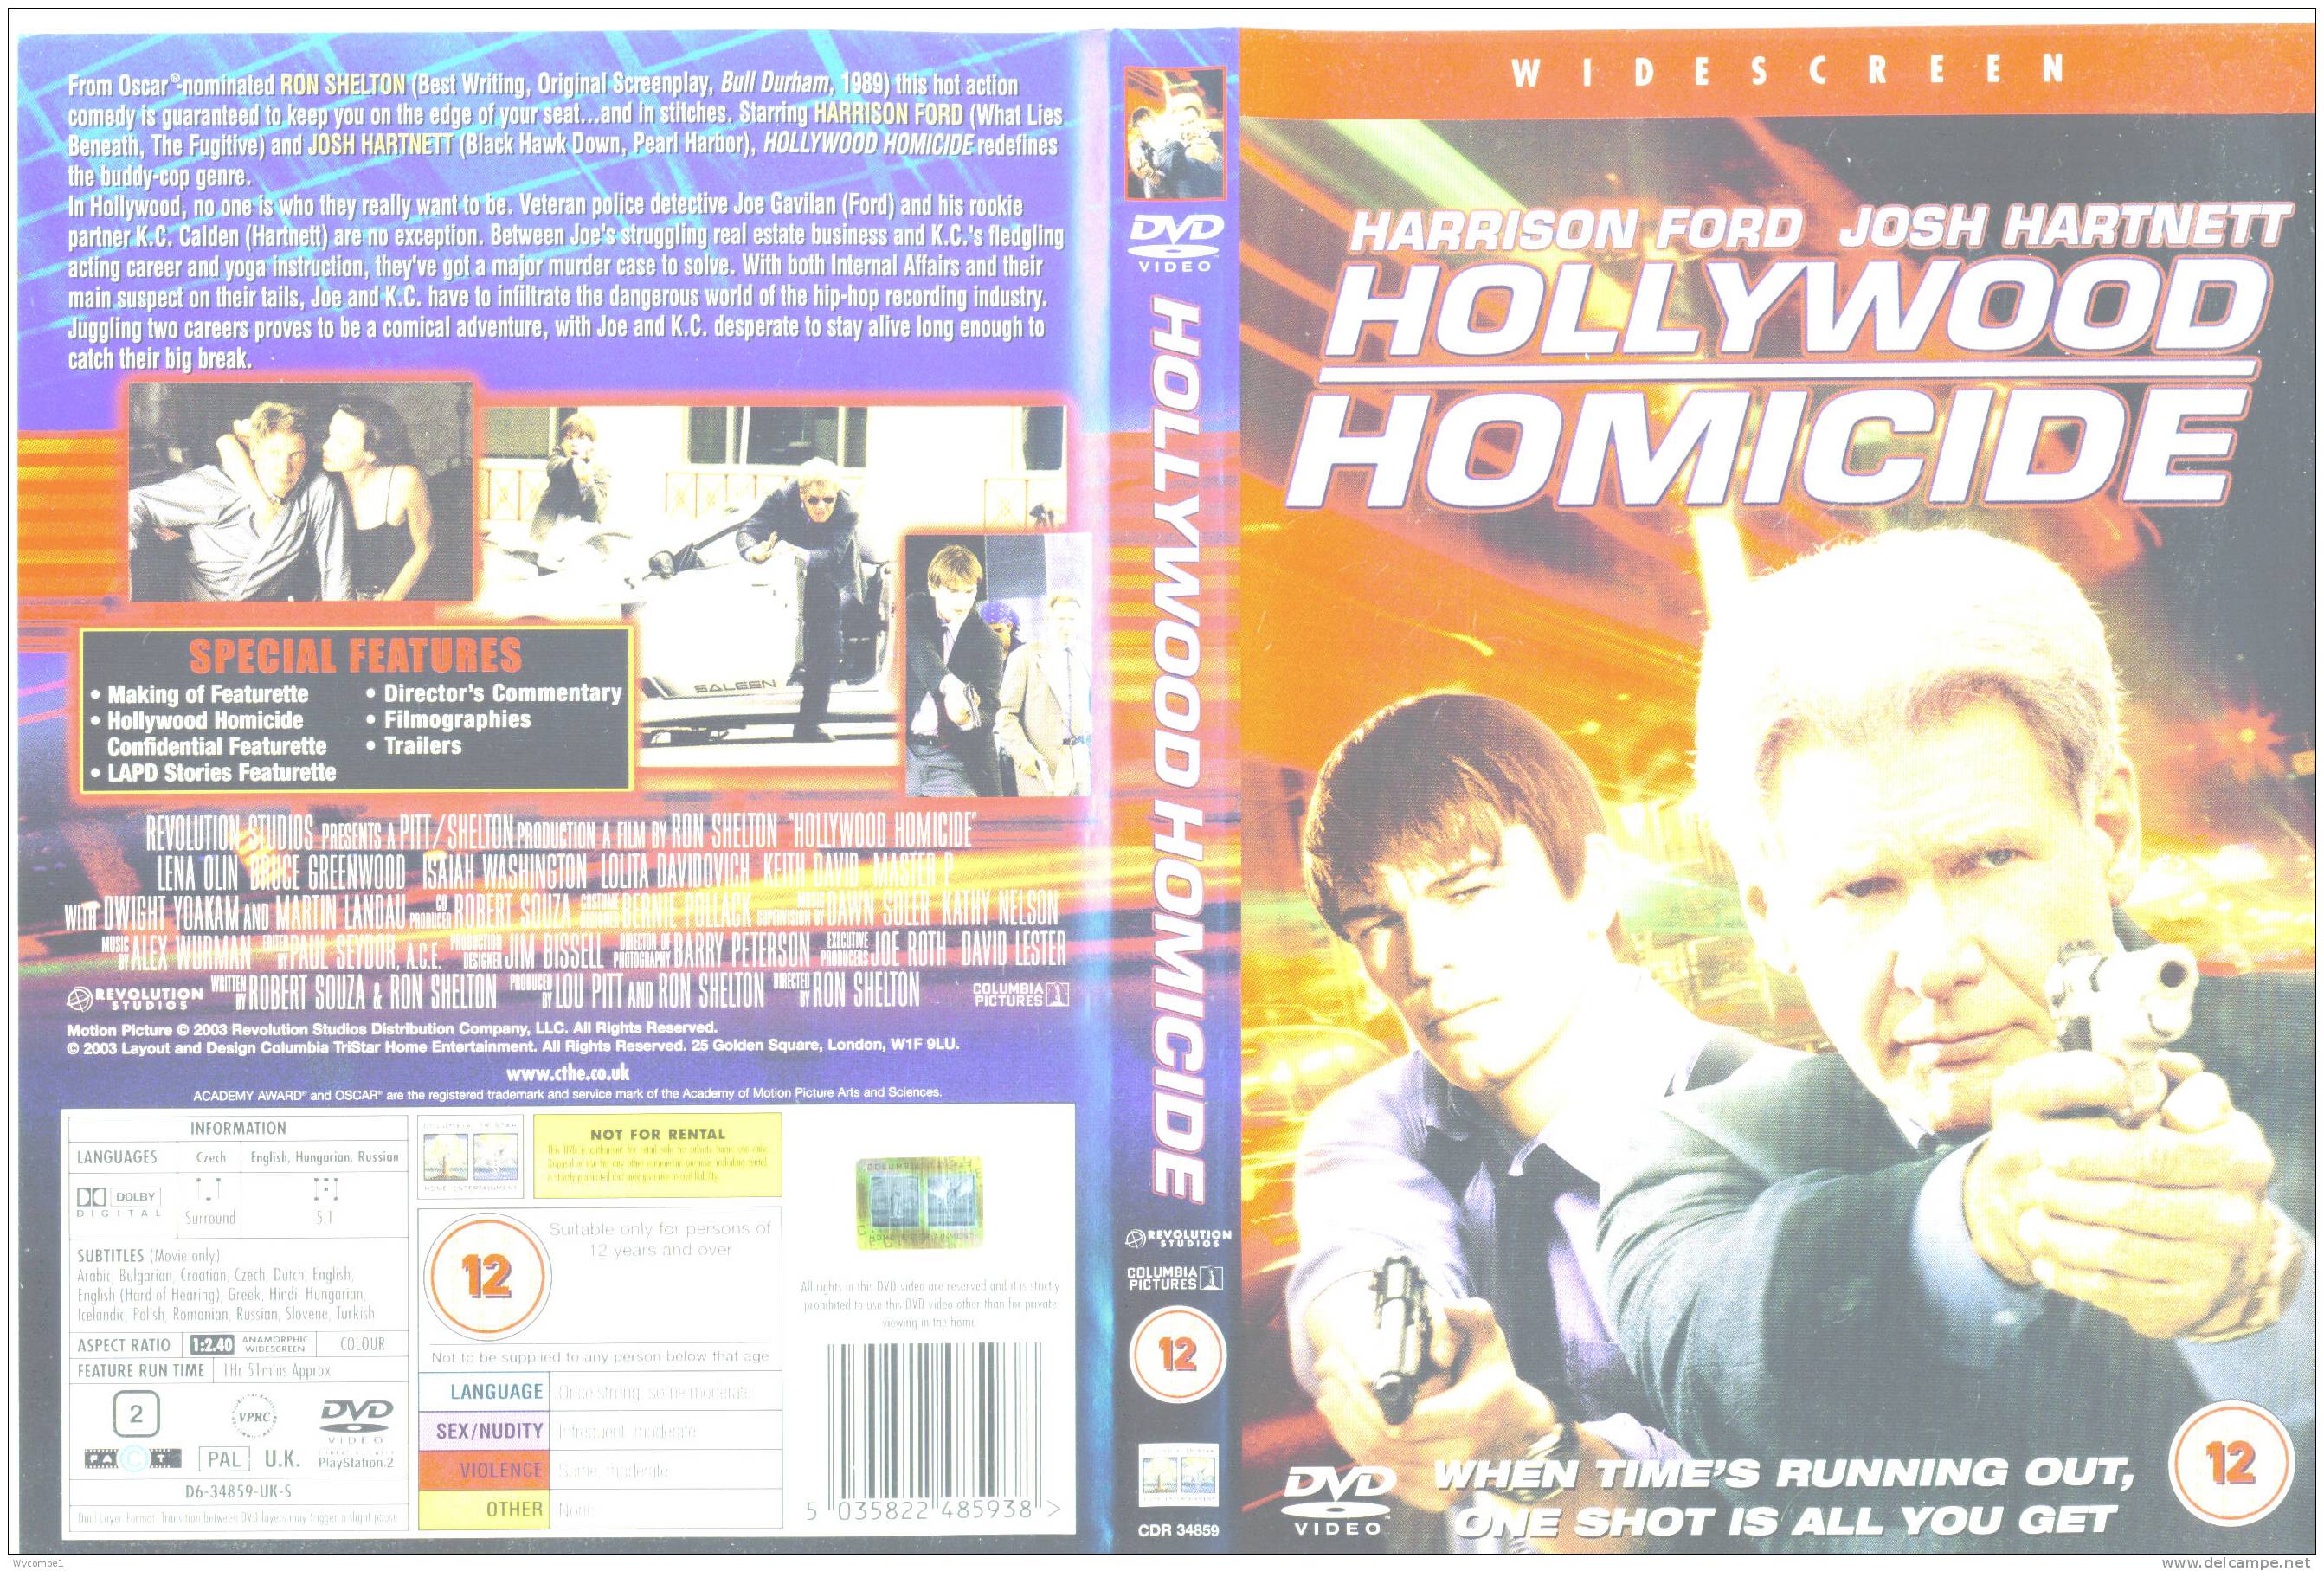 HOLLYWOOD HOMICIDE - Harrison Ford (Details In Scan) - Comedy